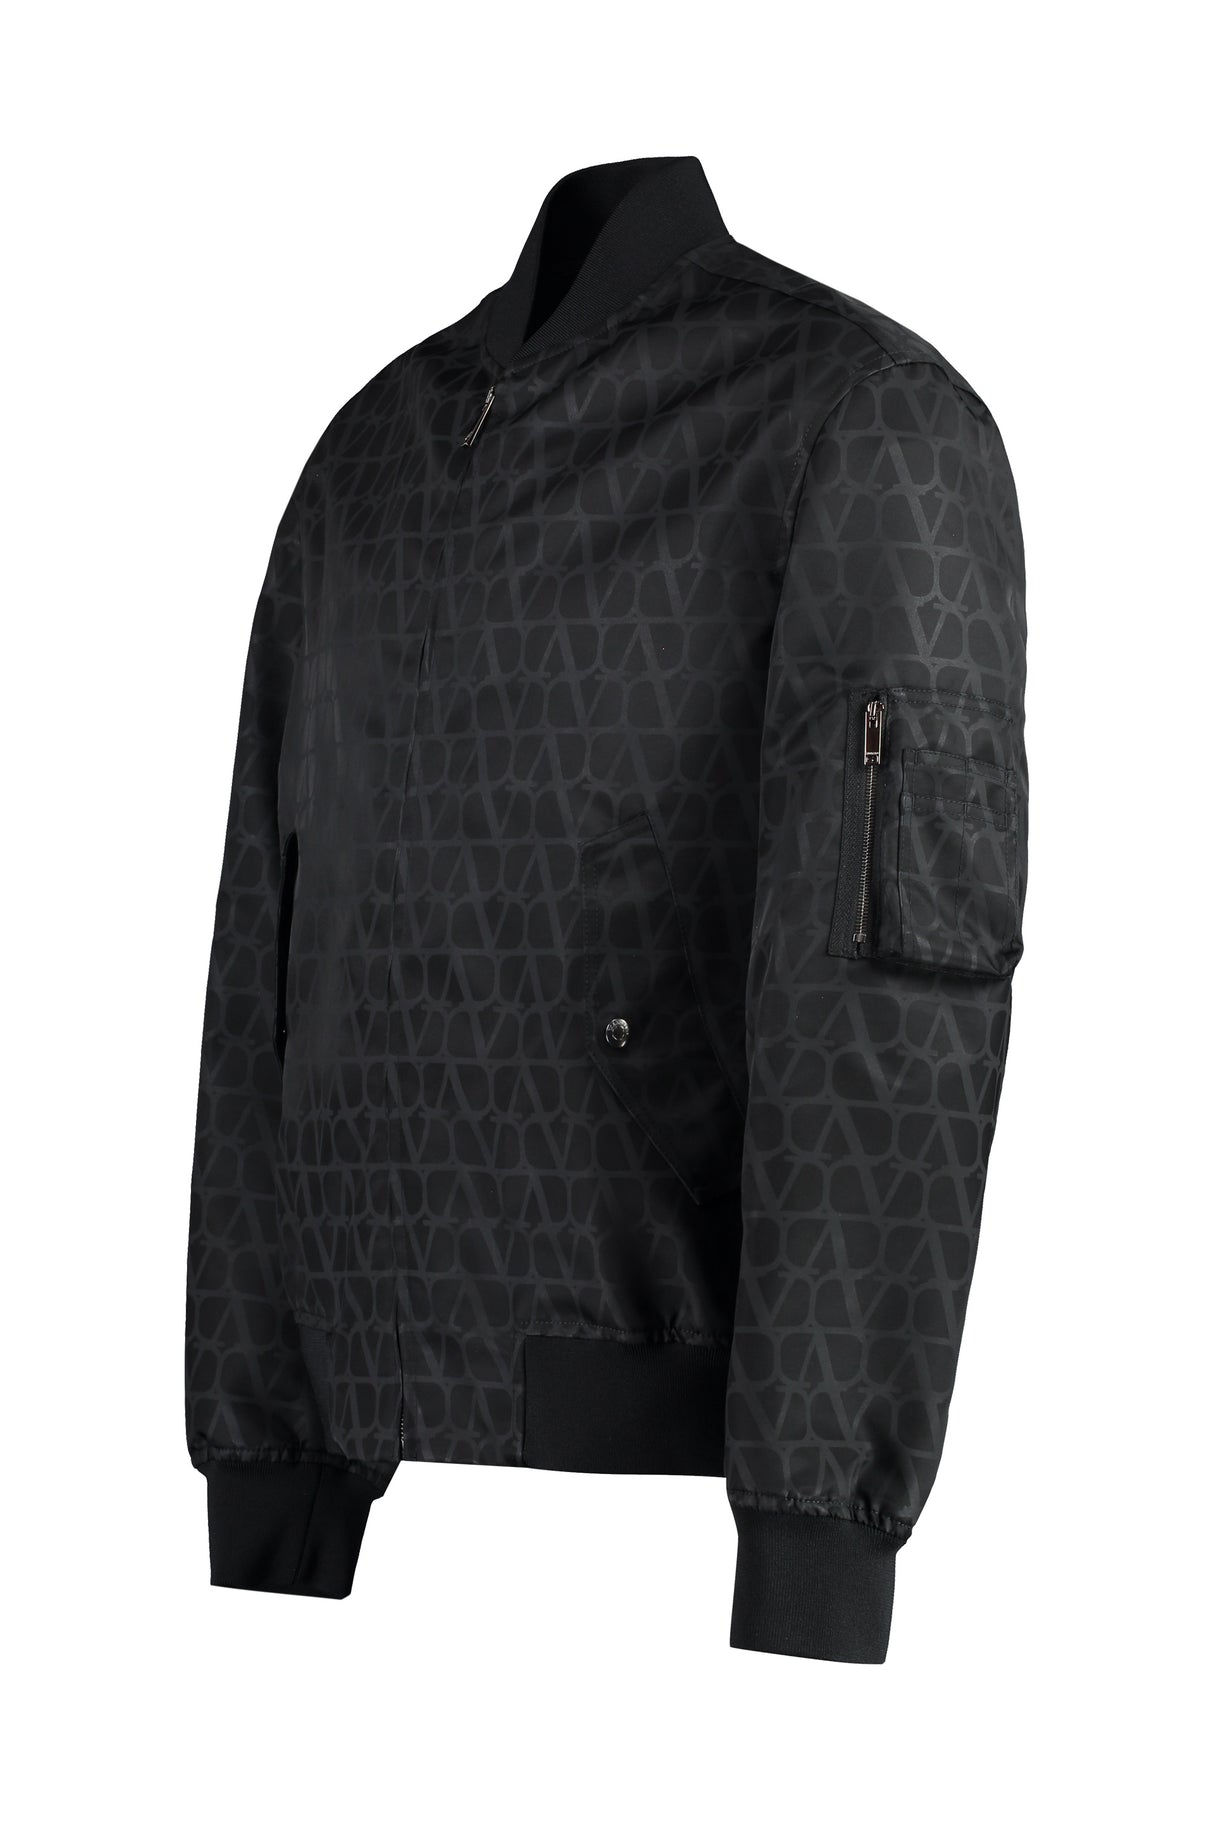 VALENTINO Black Nylon Bomber Jacket with Iconic Motif and Practical Features for Men - FW23